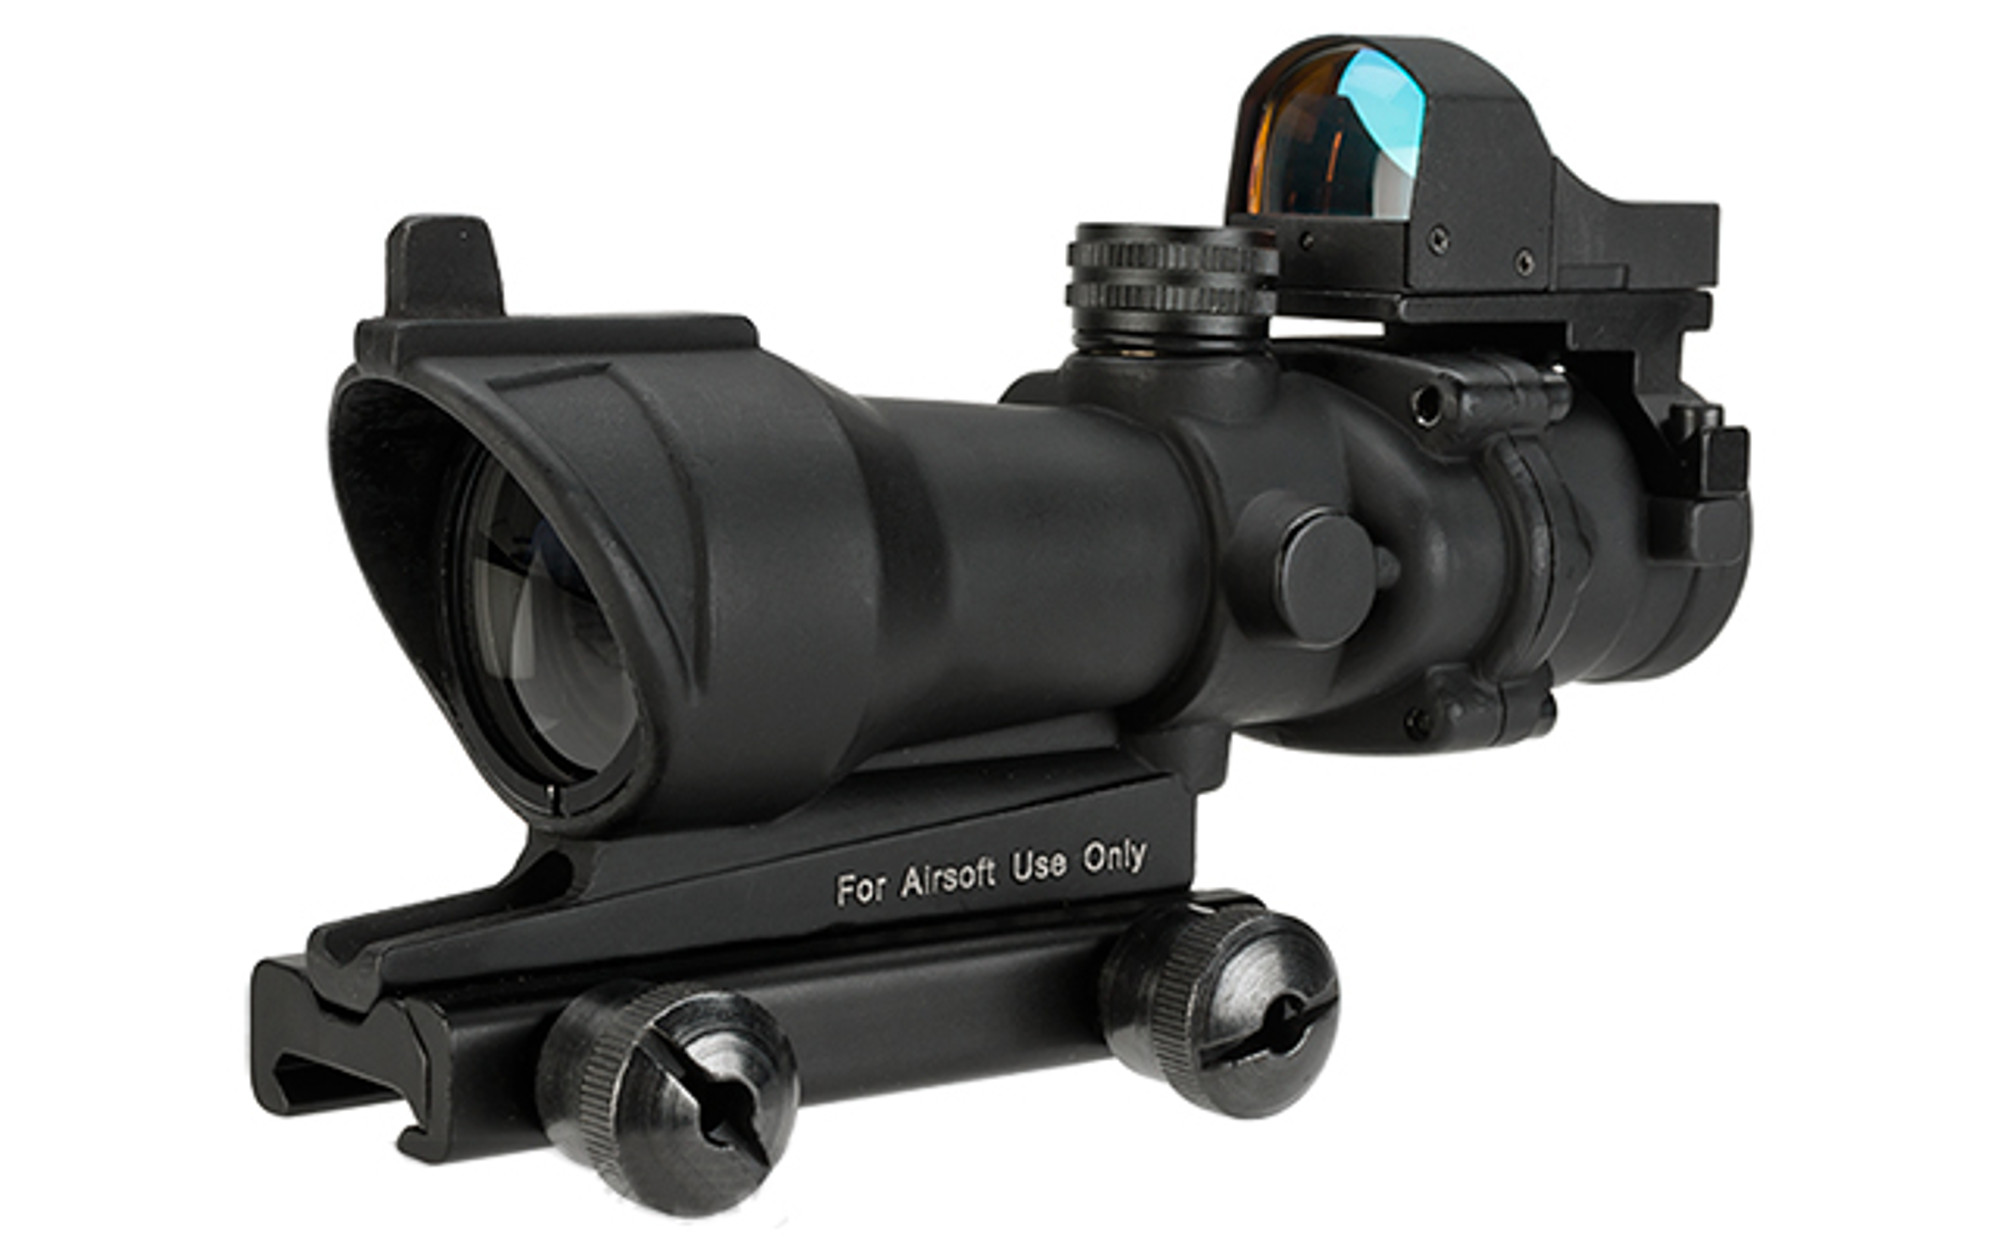 Bravo OP Style 4x32 Magnified Scope with Crosshair Reticle and Red Dot Reflex Sight